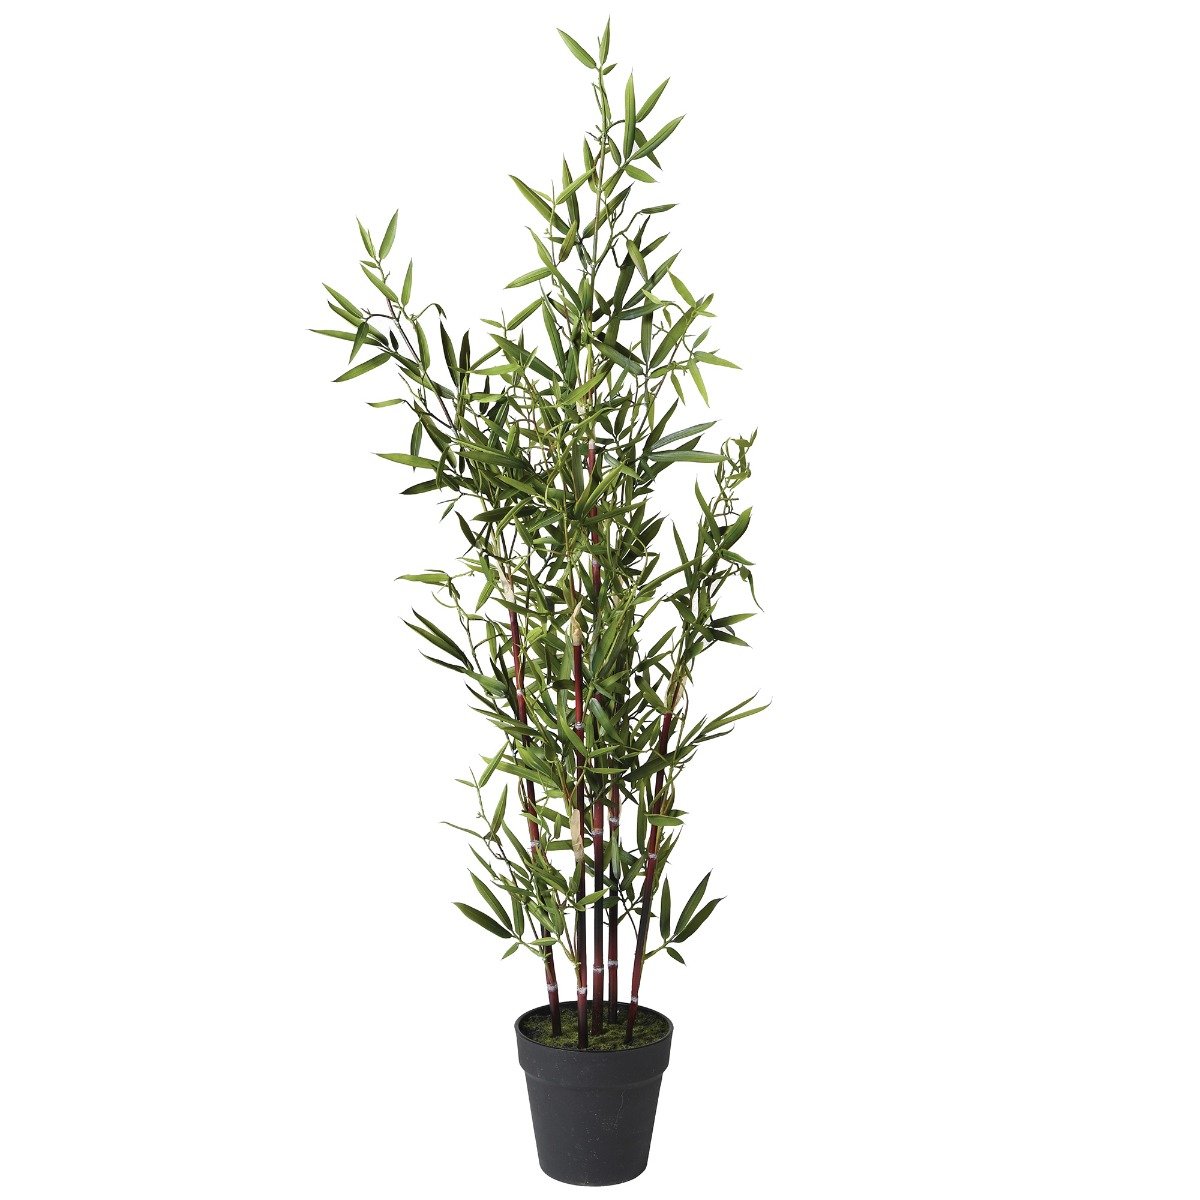 Potted Bamboo Tree, Green Metal | Barker & Stonehouse